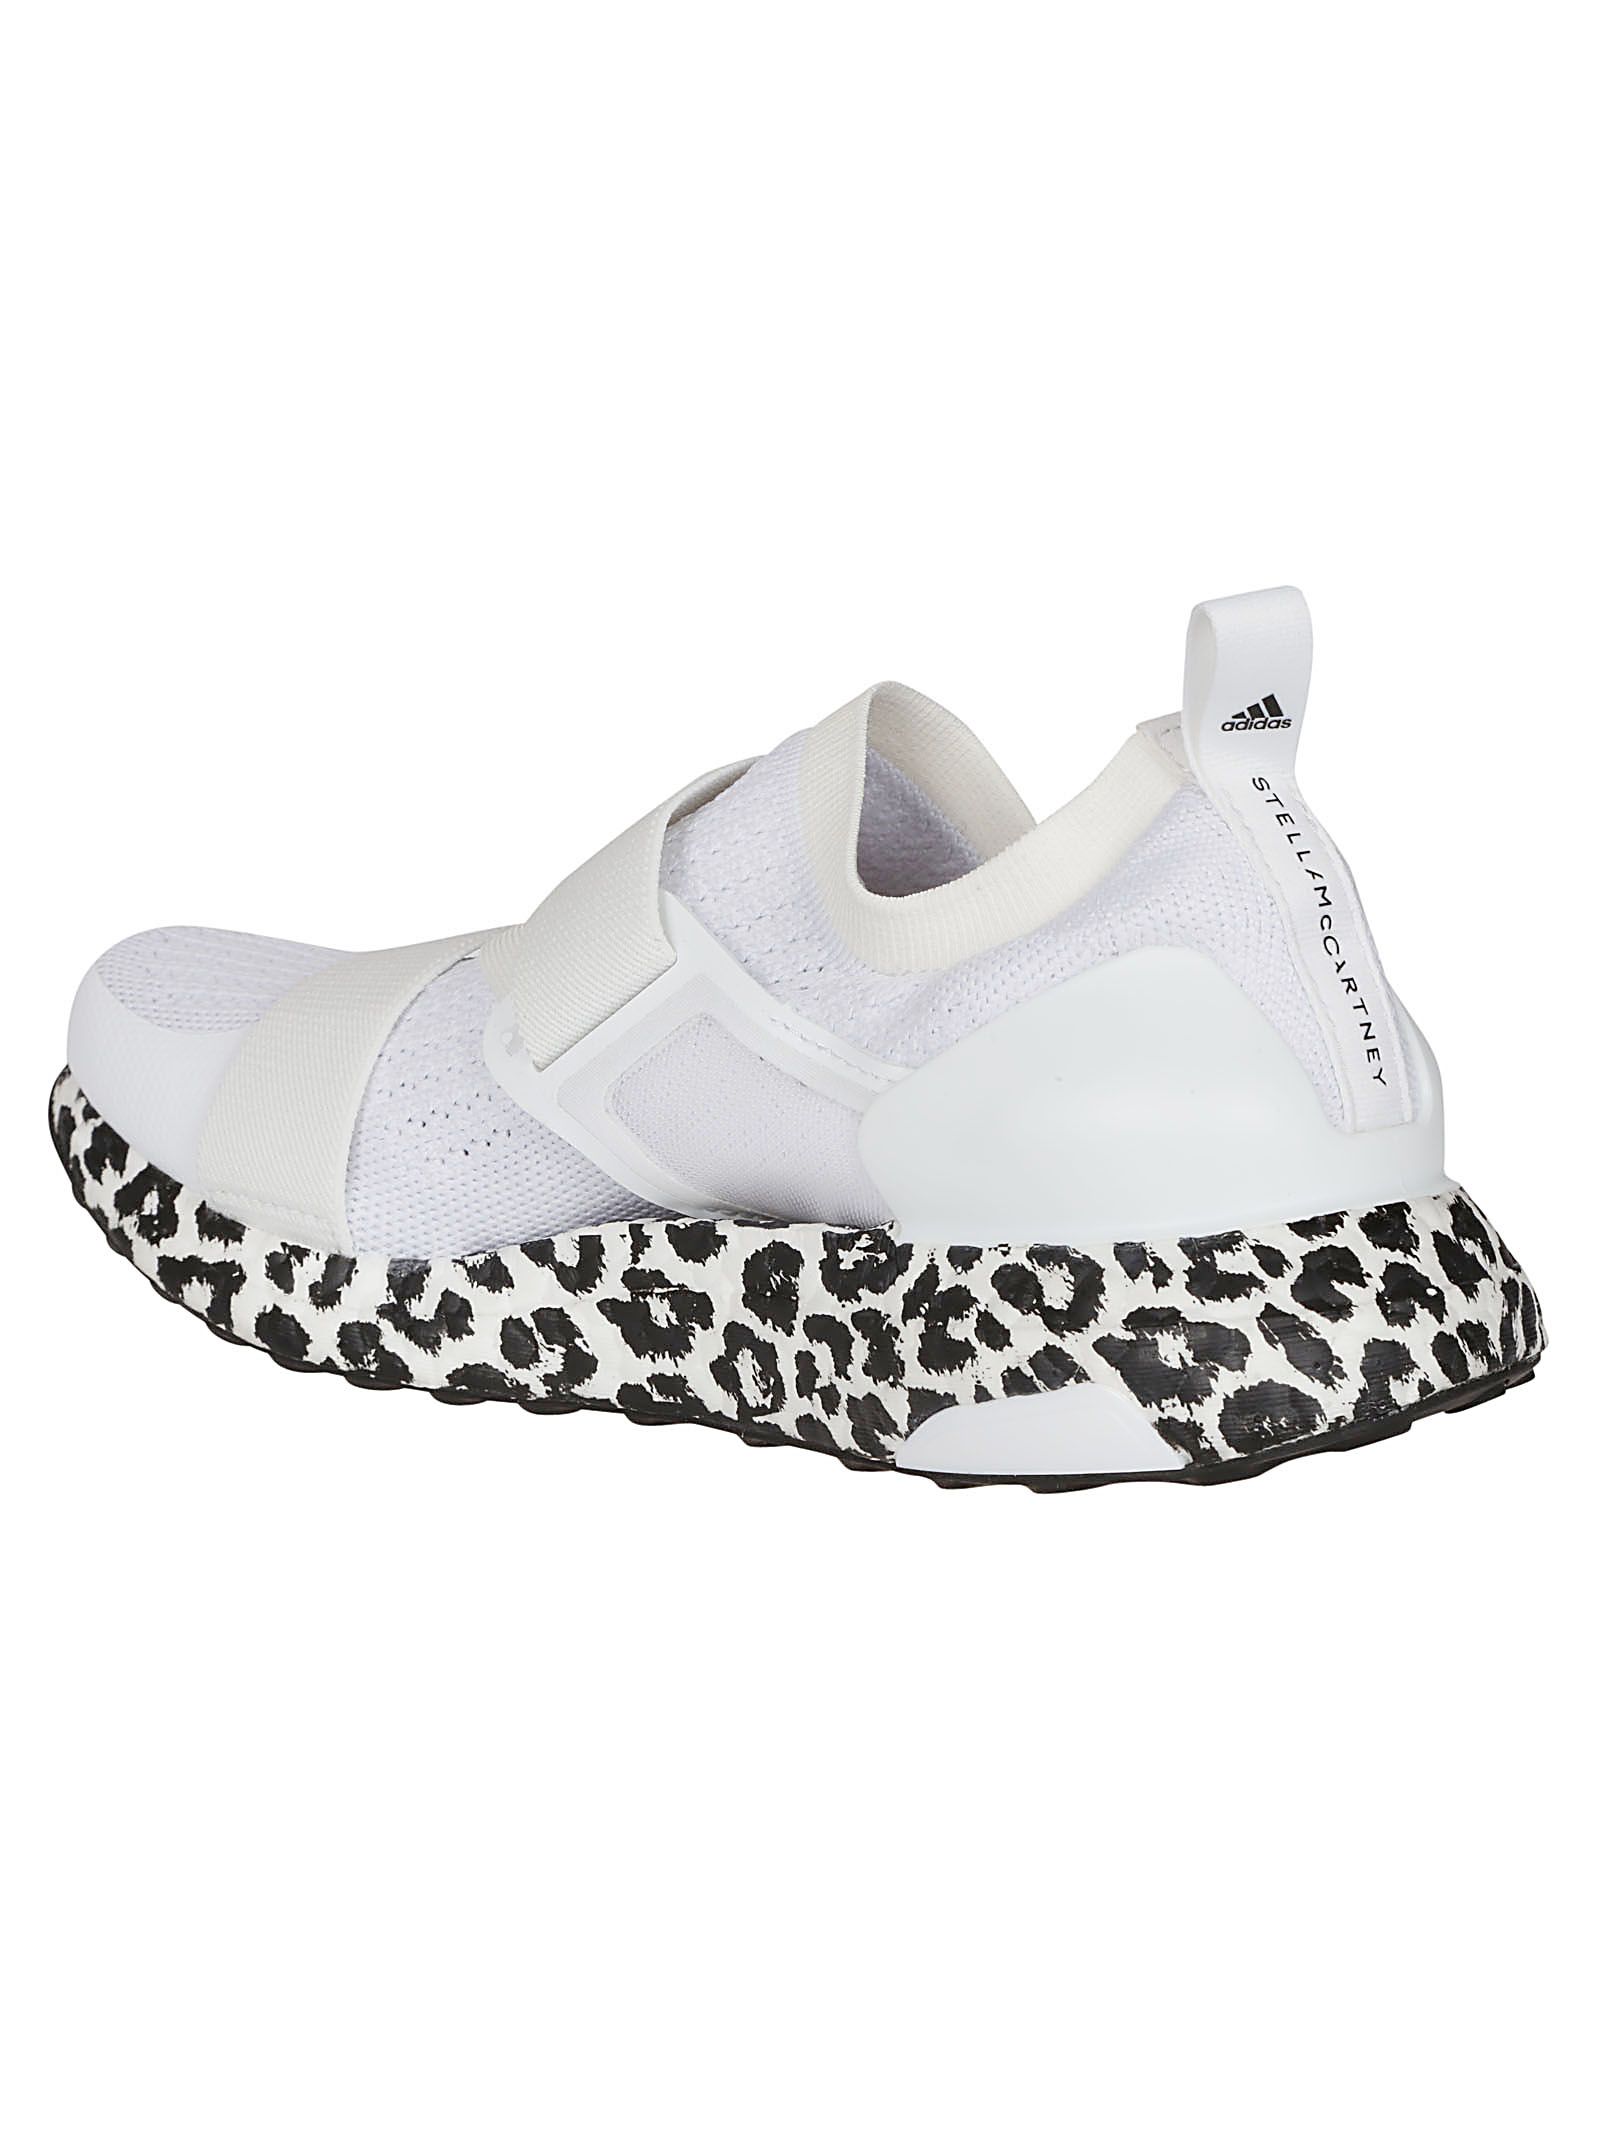 ADIDAS BY STELLA MCCARTNEY WOMEN'S AC7548 WHITE POLYESTER SNEAKERS